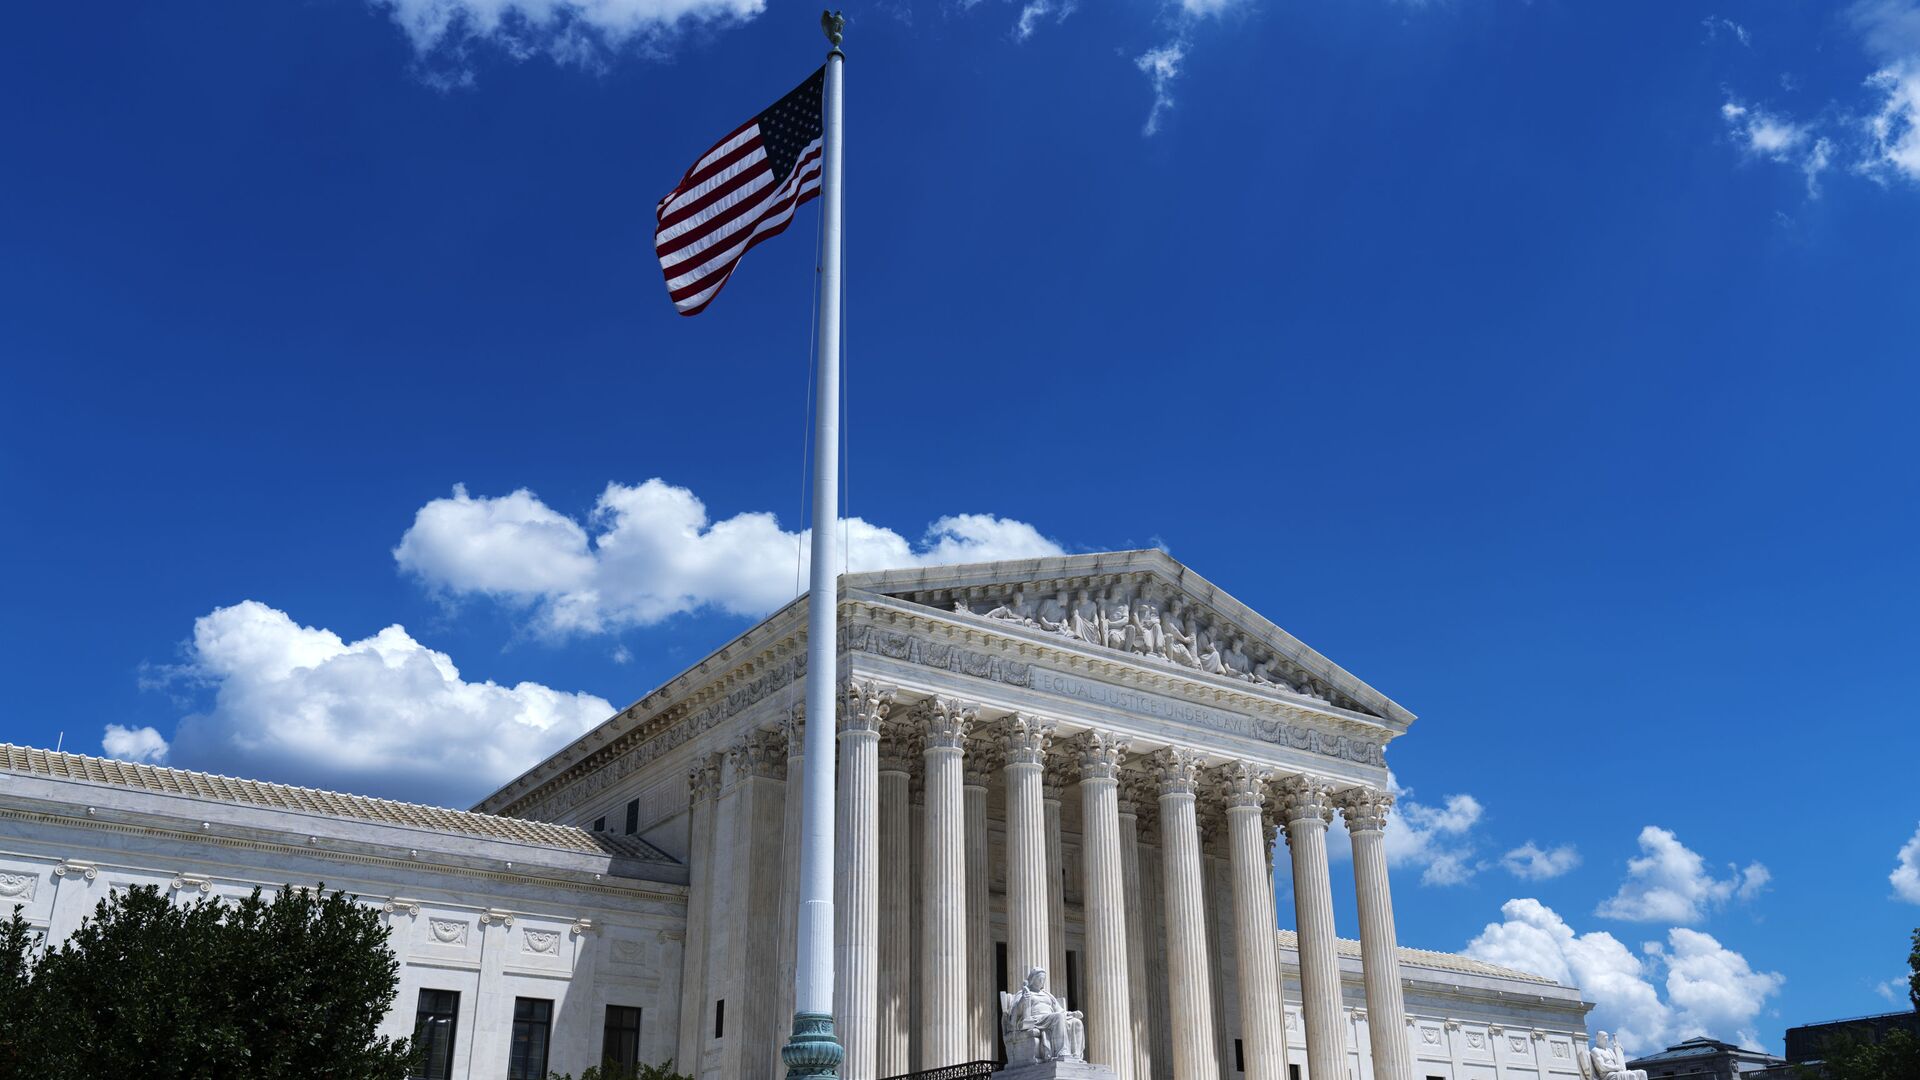 The US Supreme Court is seen on Capitol Hill in Washington, Wednesday, June 30, 2021 - Sputnik International, 1920, 02.12.2021